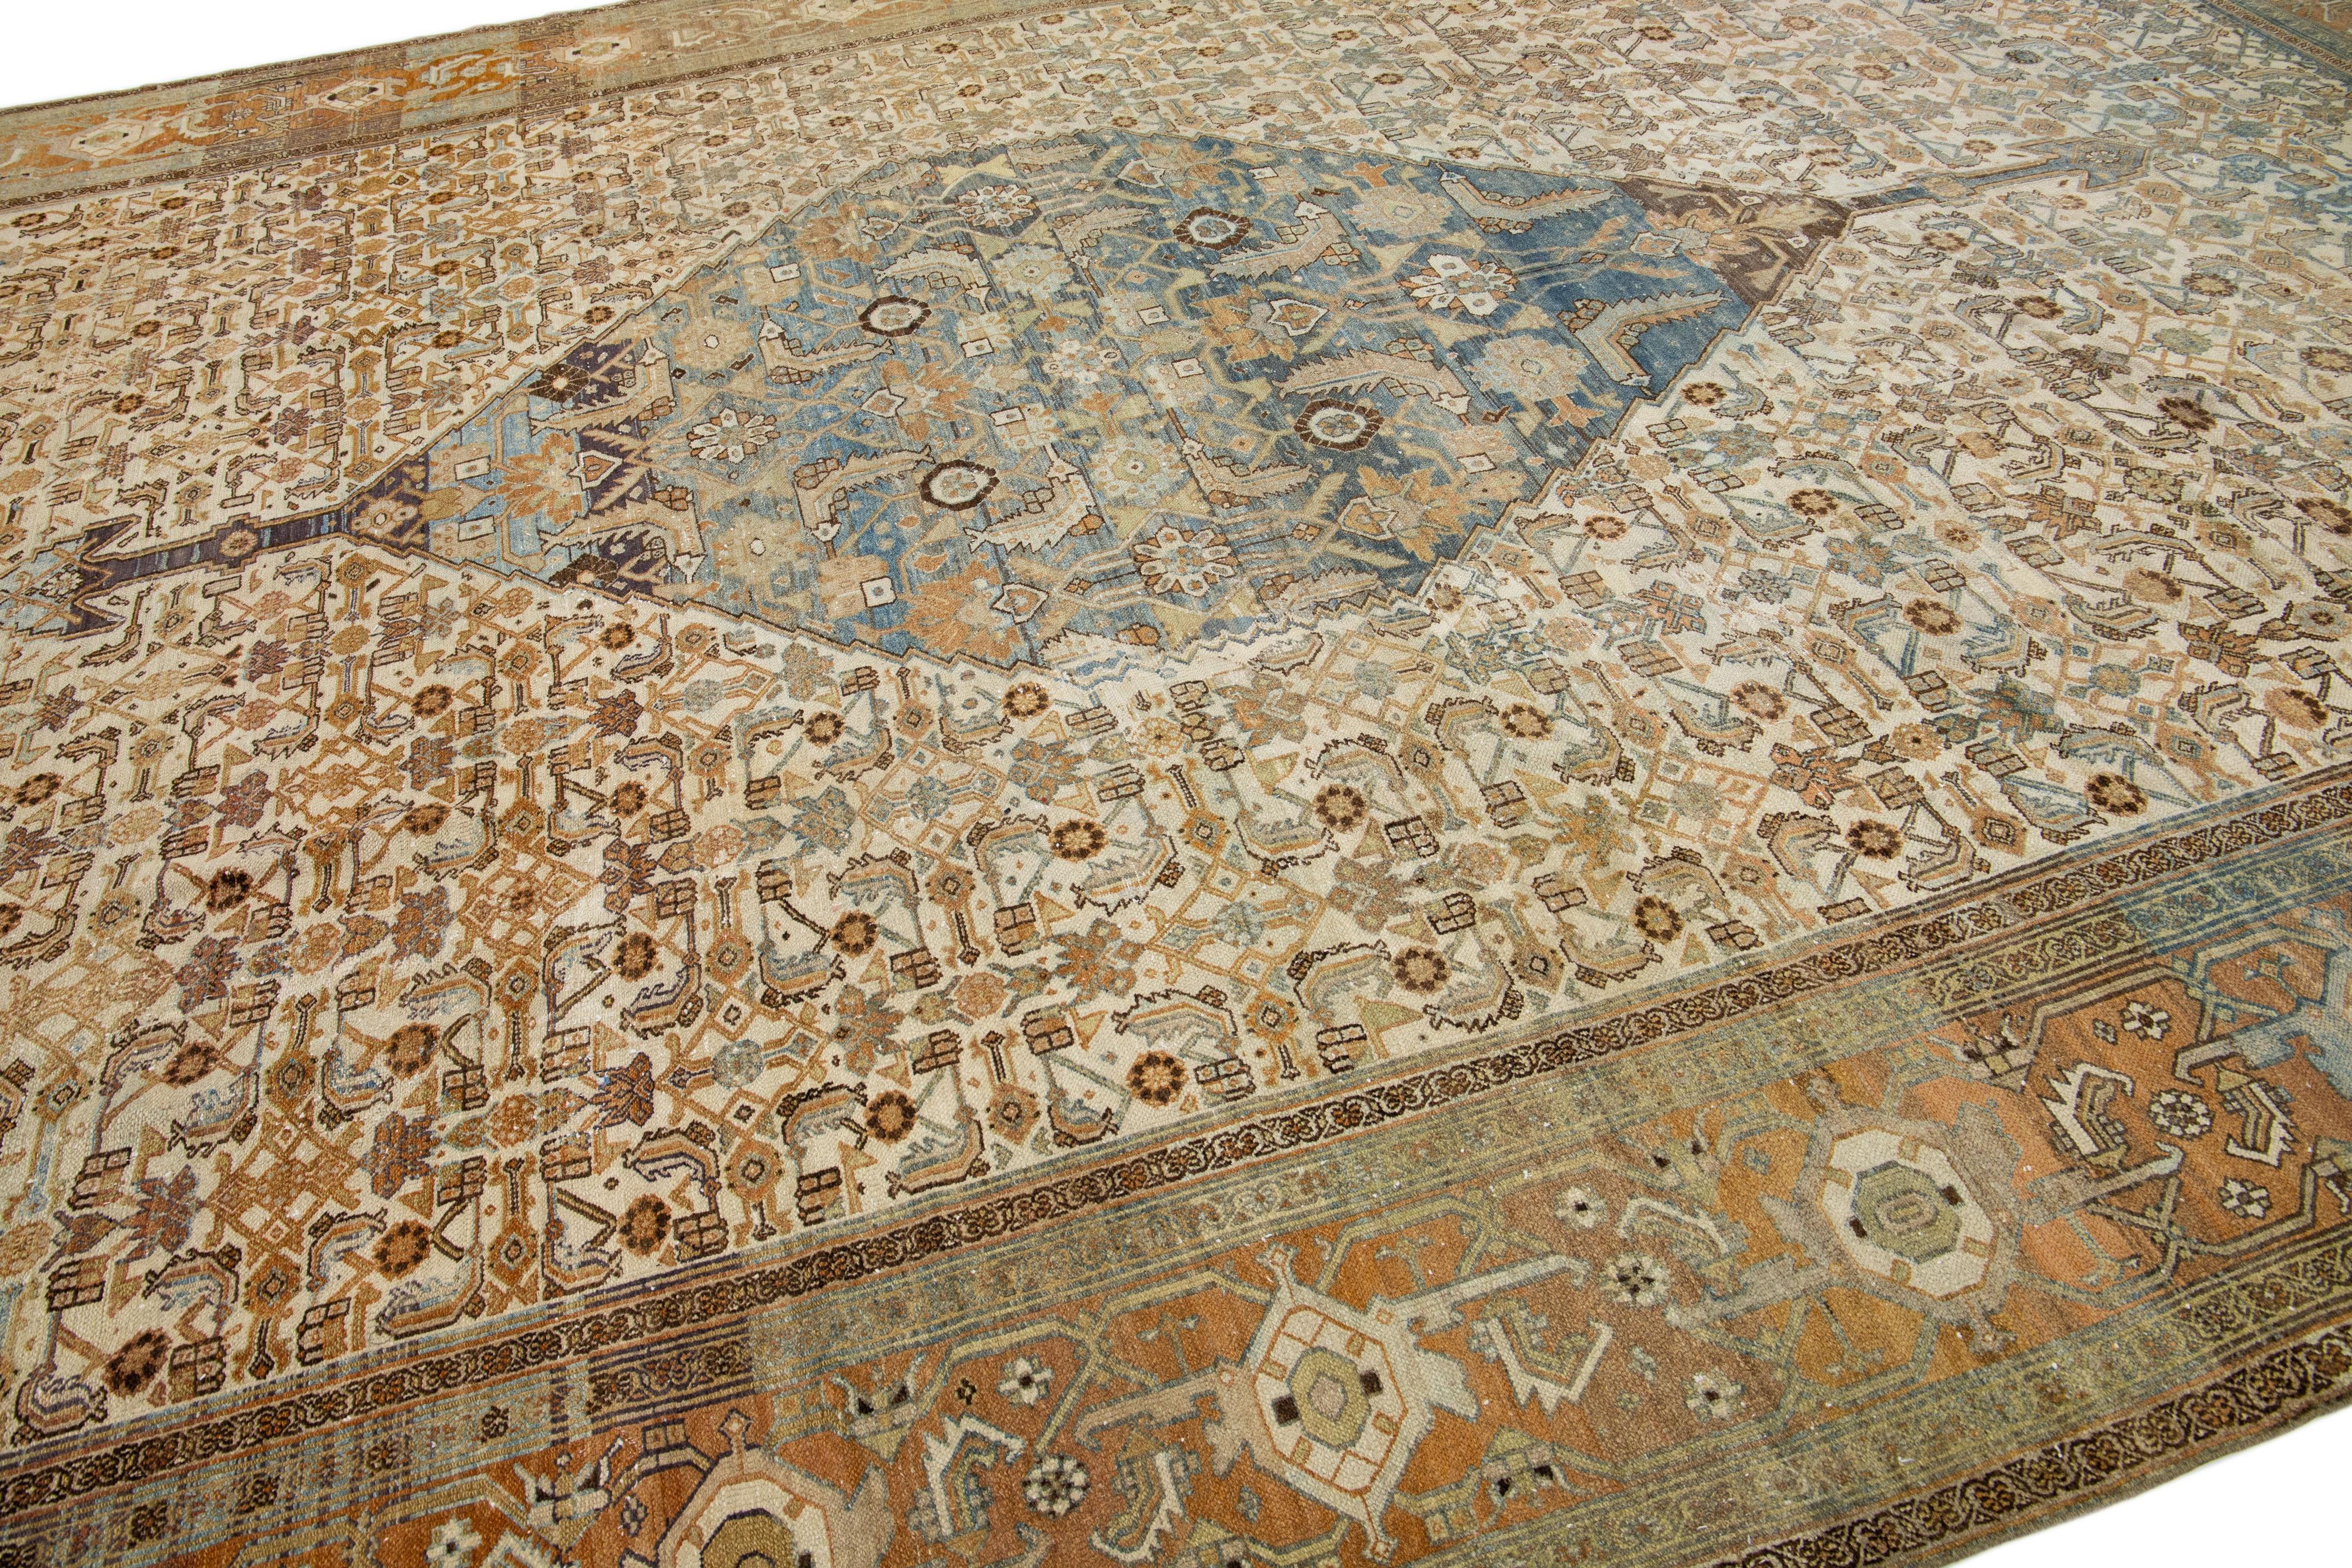 Beautiful antique Persian hand-knotted wool rug with a beige color field. This piece has a rust-designed frame with blue and brown accents in a gorgeous all-over pattern.

This rug measures: 11'6' x 17'2